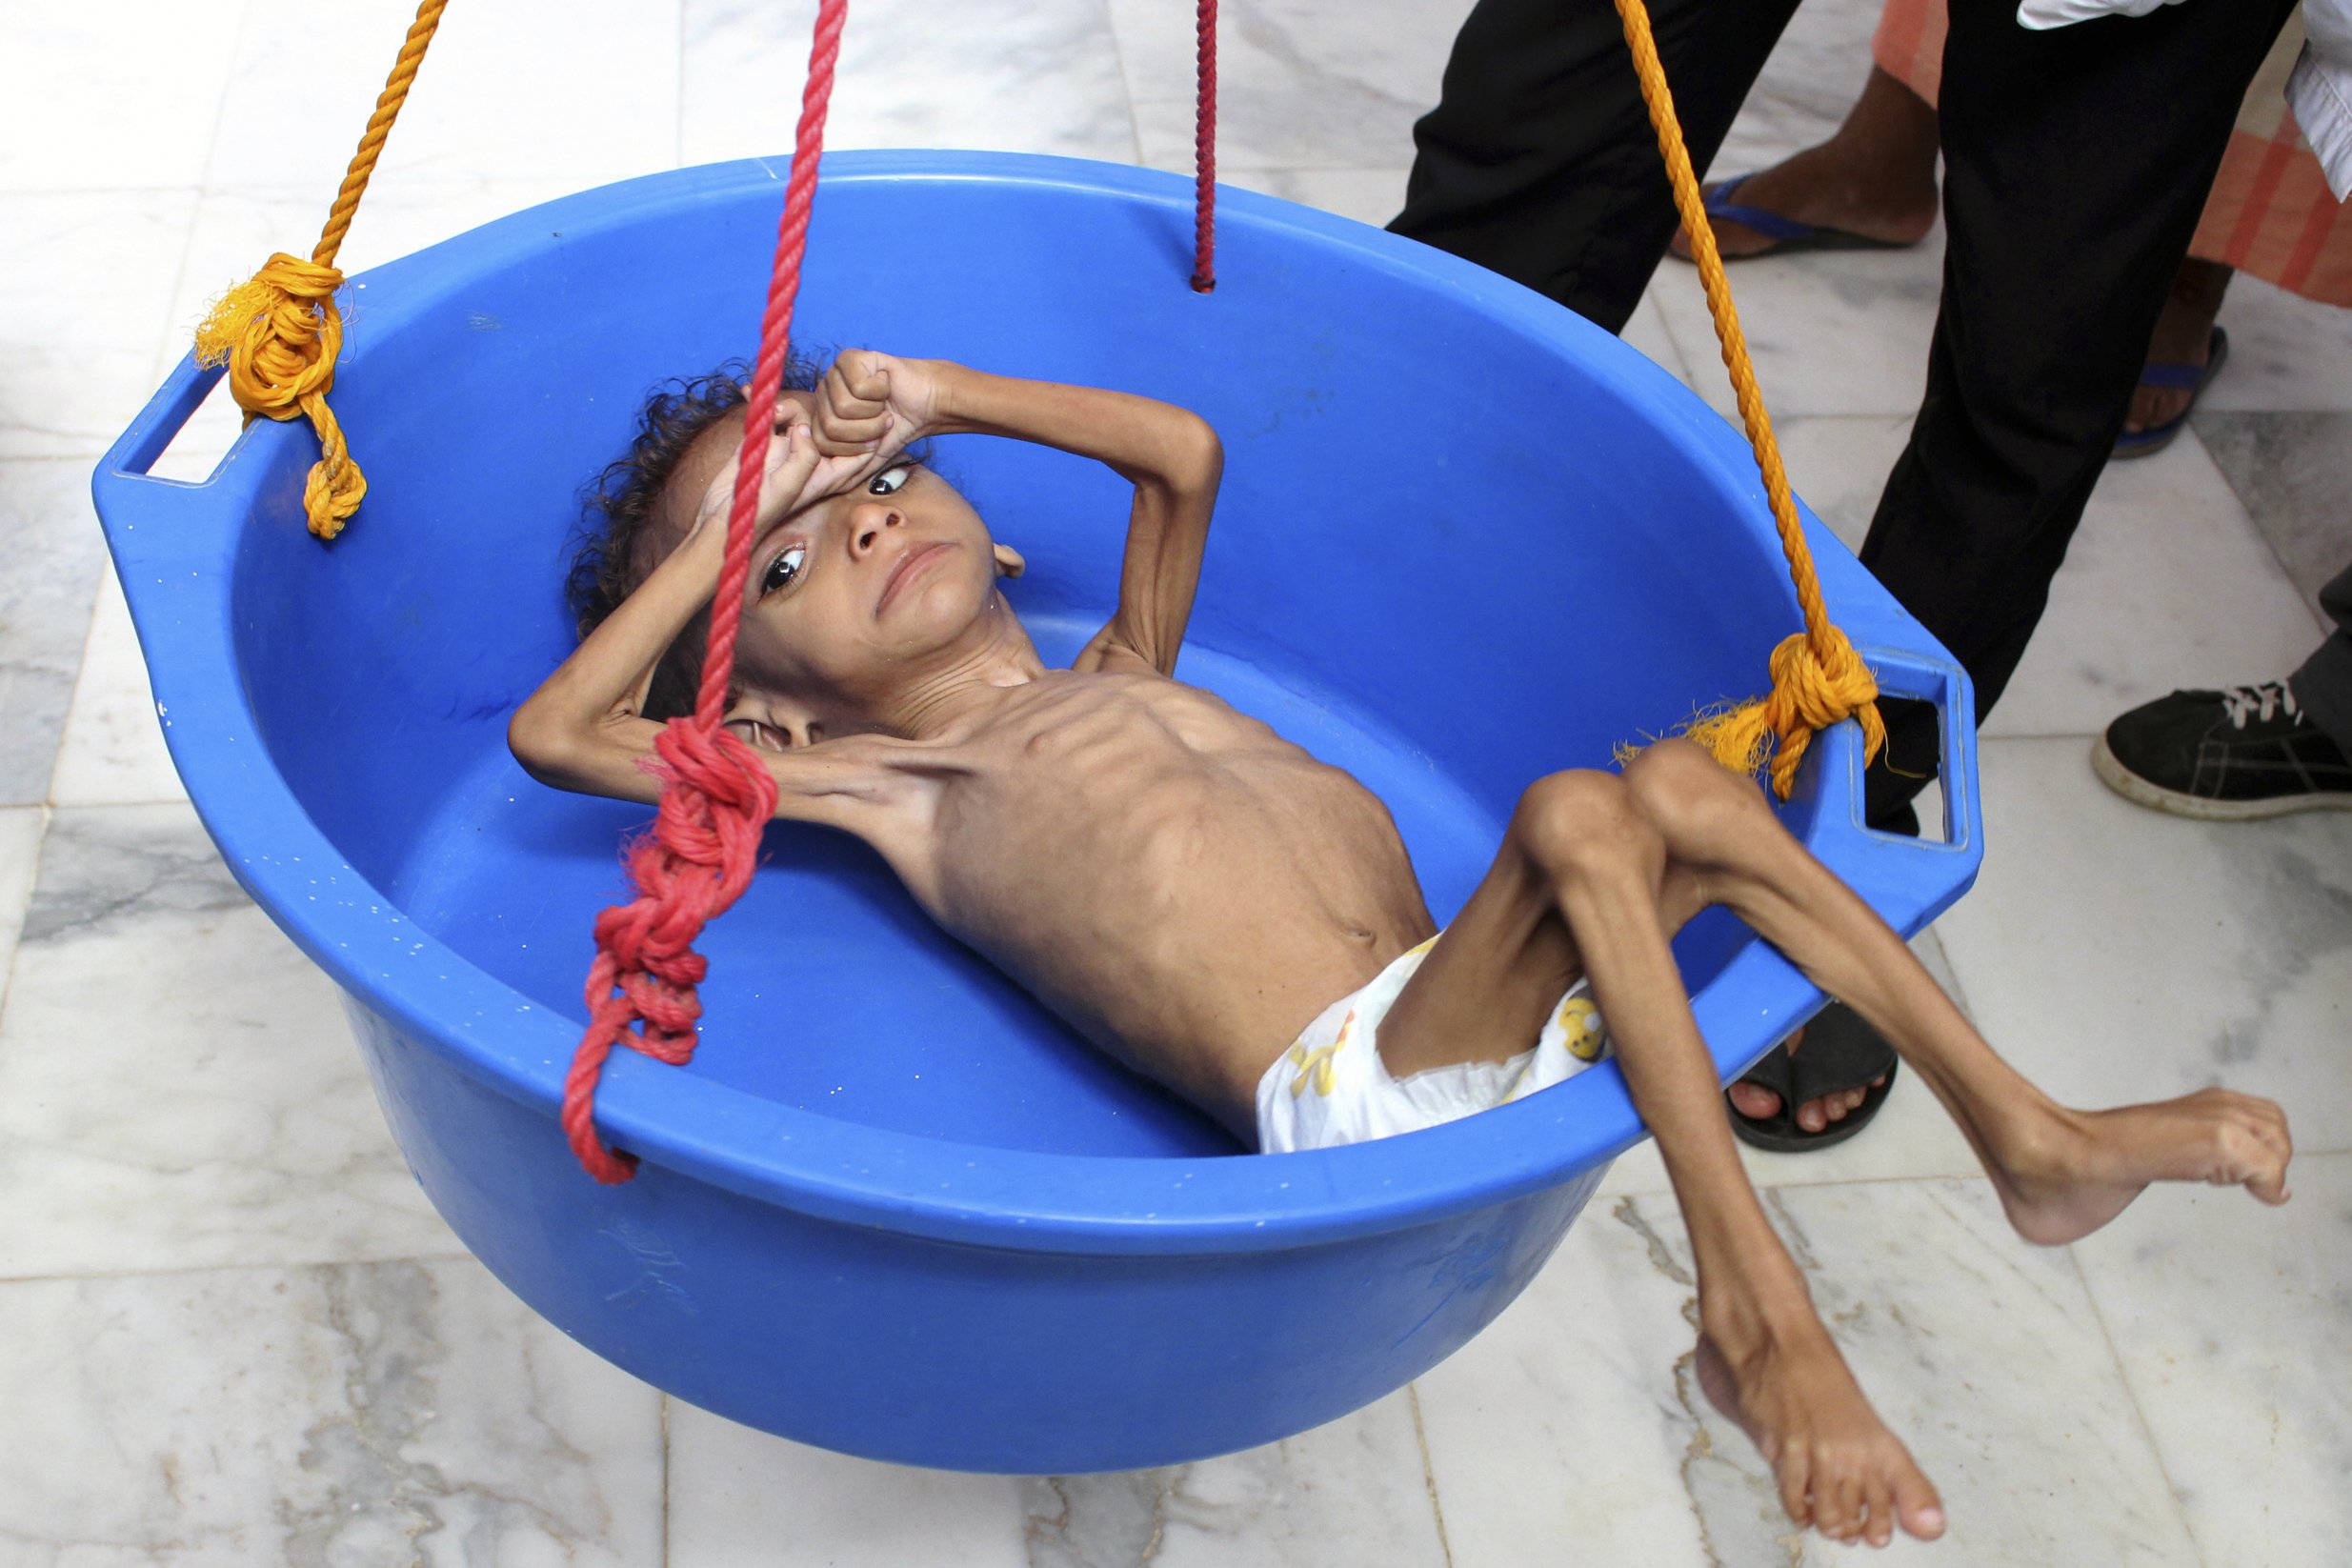 A Yemeni child suffering from malnutrition is weighed at a hospital